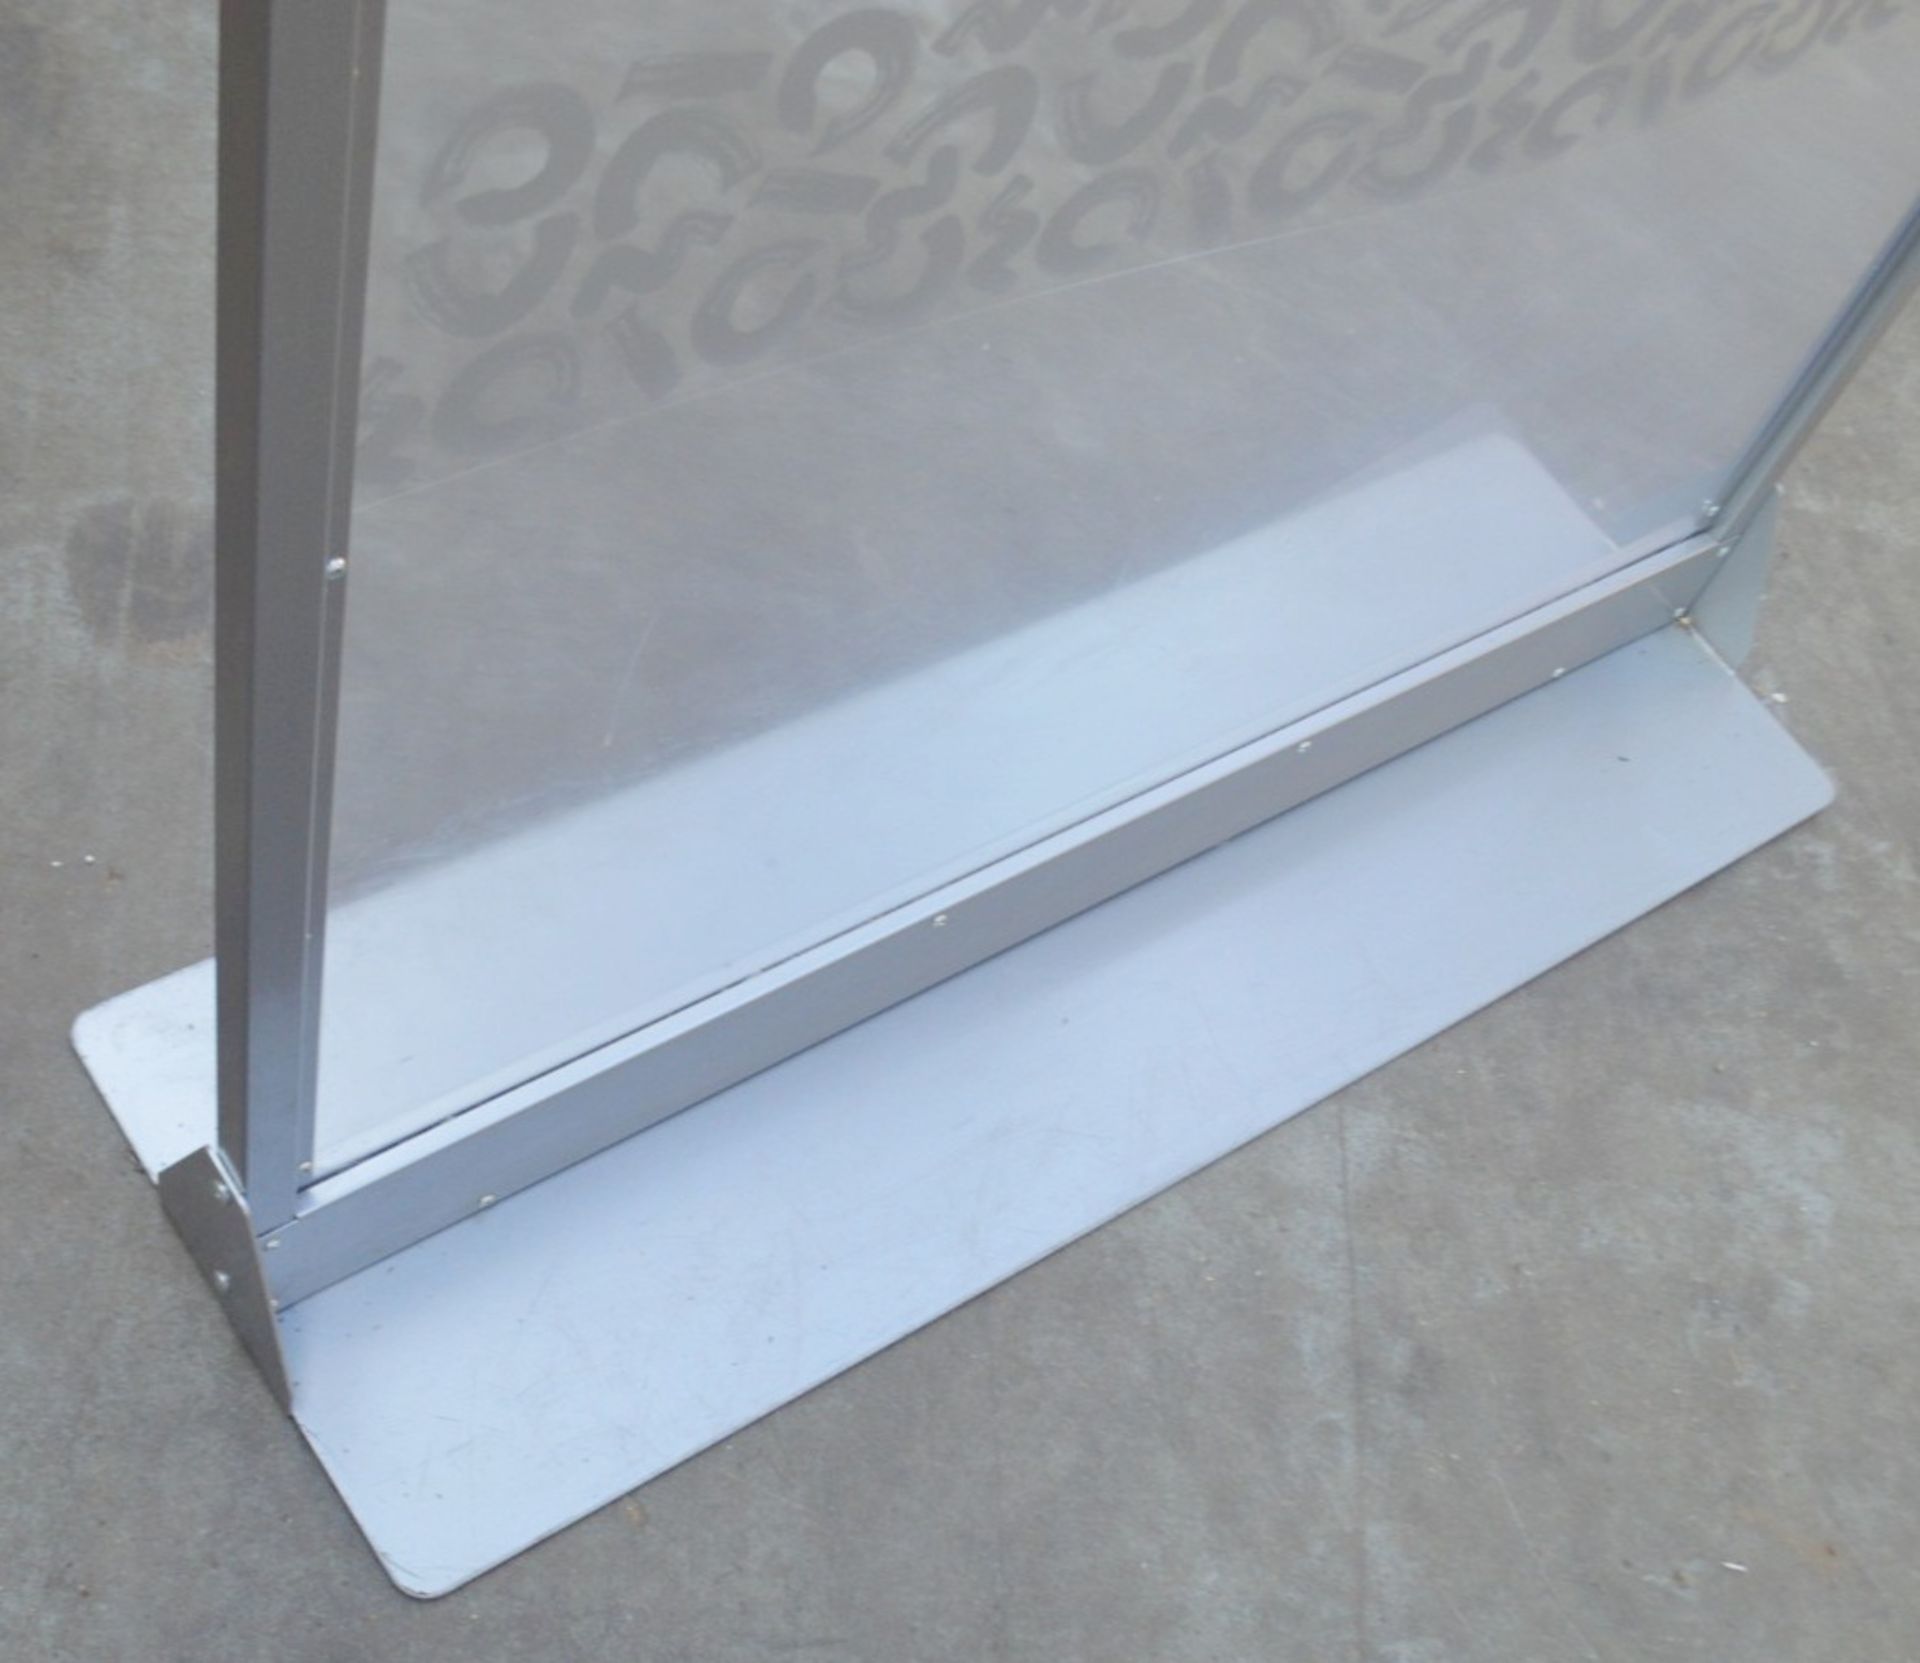 A Pair Of Freestanding 1.5-Metre Tall Protective Clear Acrylic Checkout Screen Dividers - - Image 3 of 3